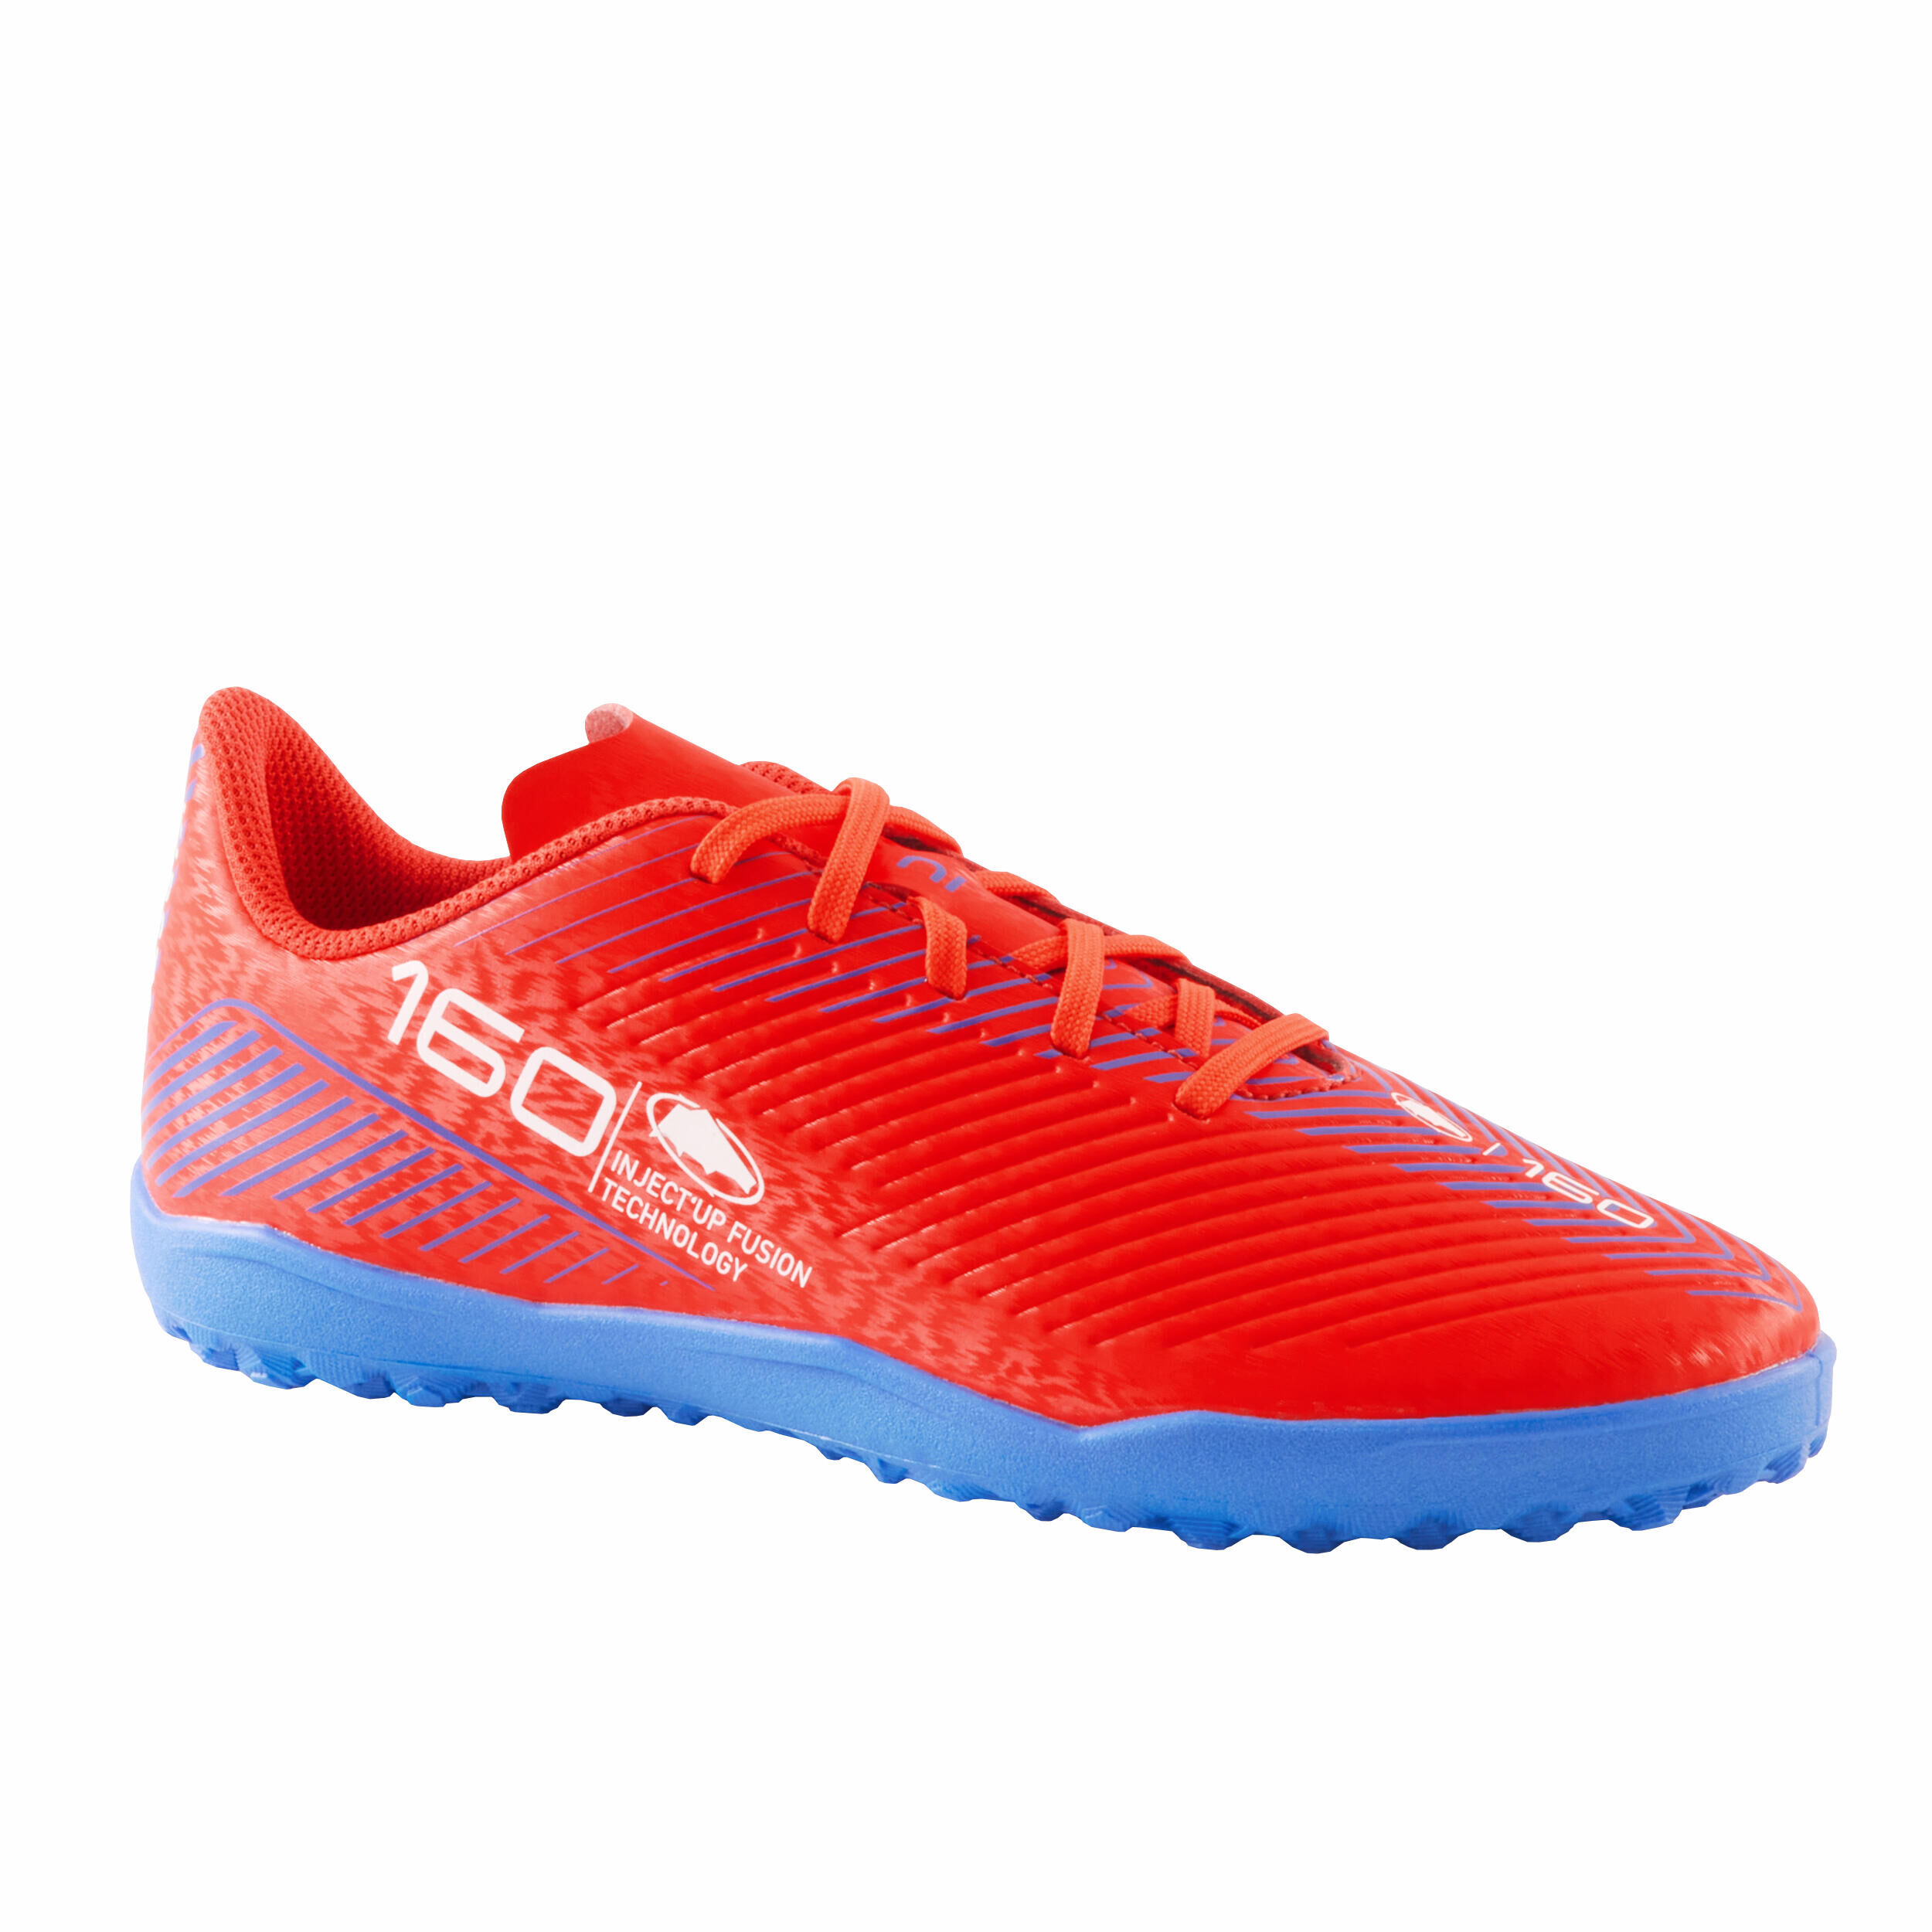 KIPSTA Kids' Lace-Up Football Boots 160 Turf - Red